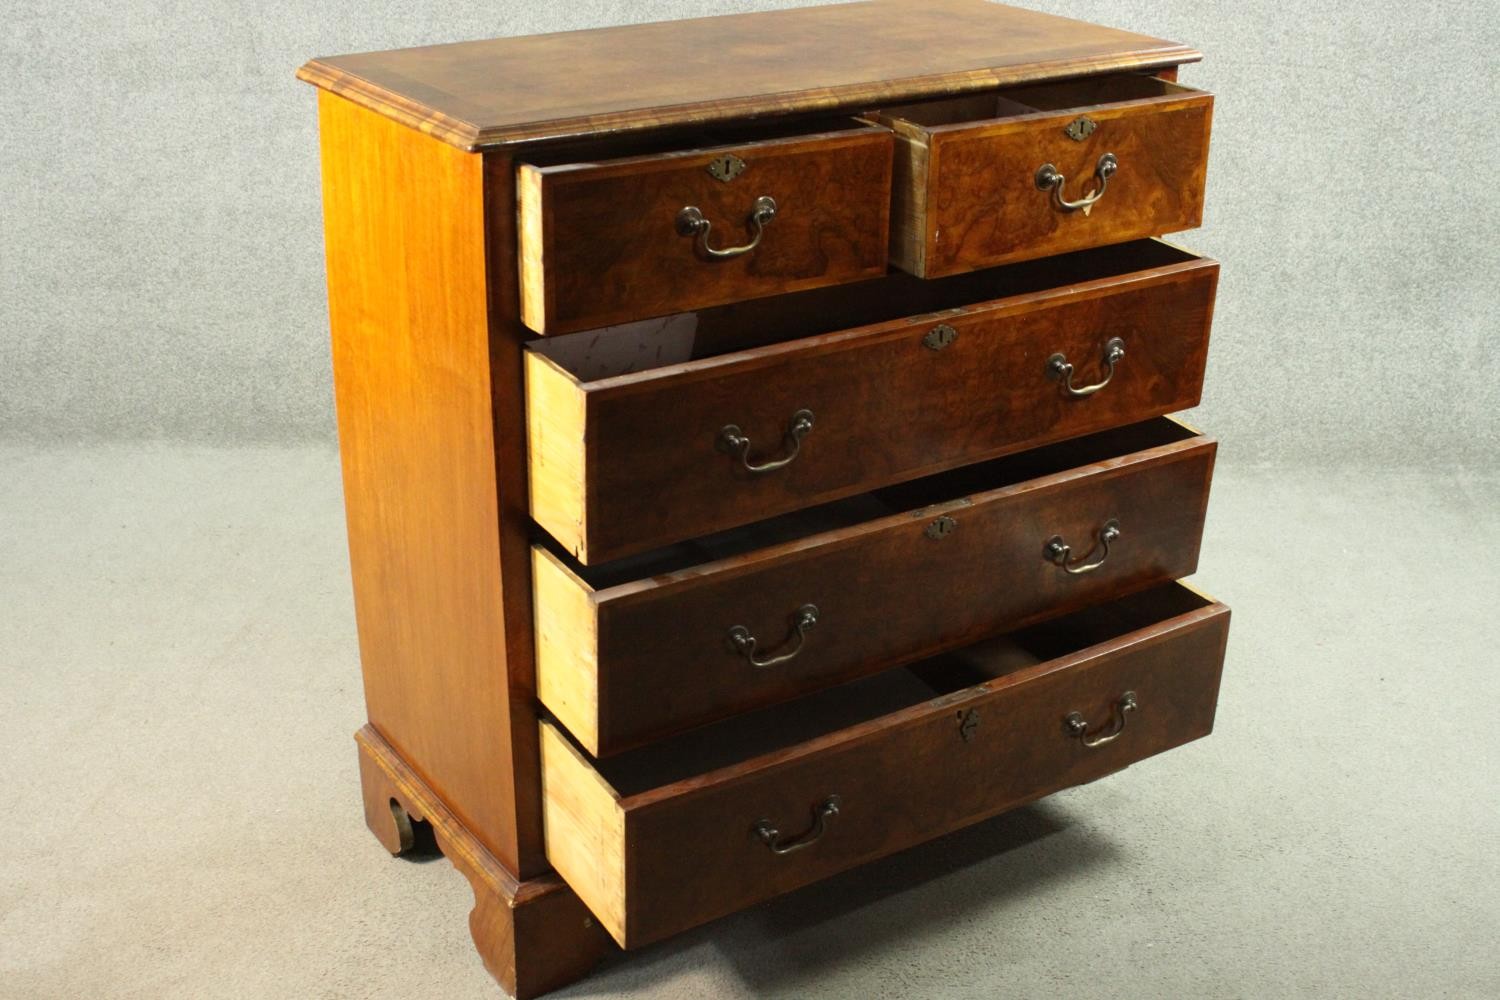 A 19th century early Georgian style walnut, crossbanded and featherbanded chest of drawers with - Image 5 of 8